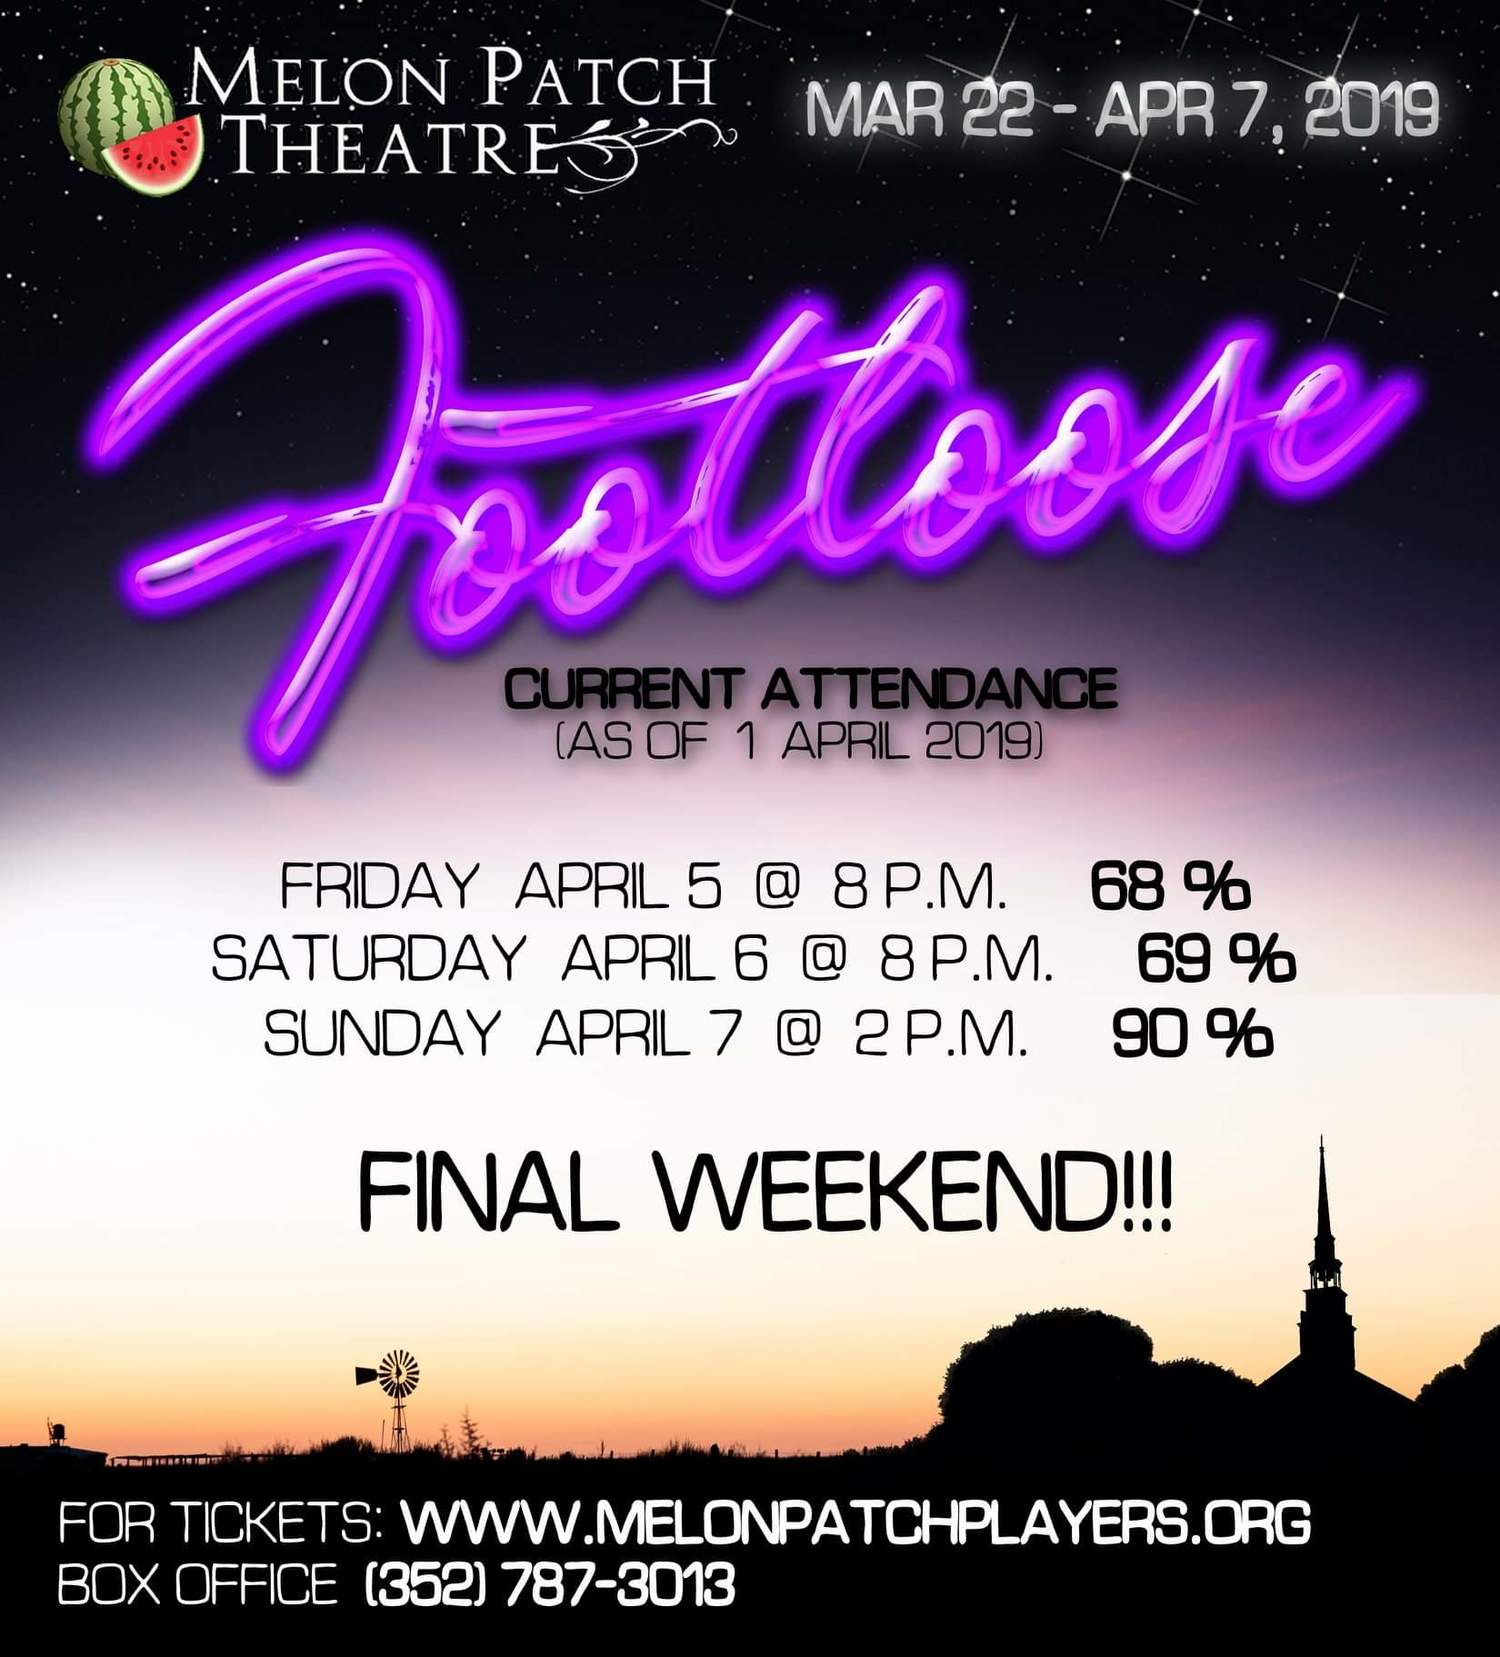 Final weekend is selling out fast!